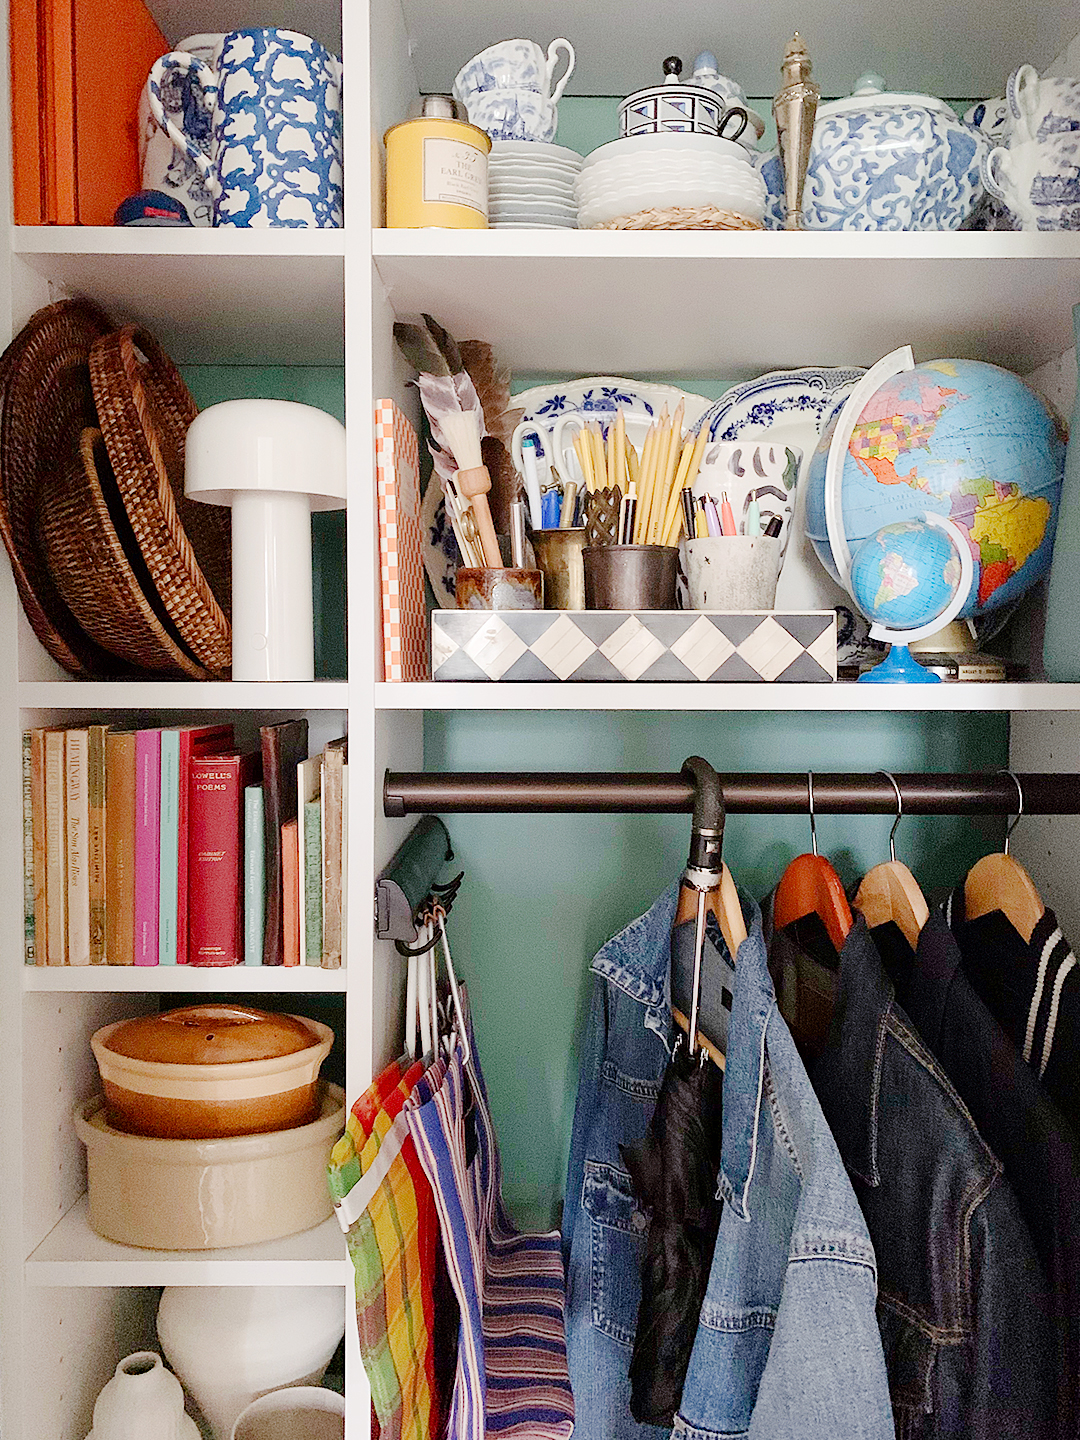 Our Style Editor's Front Hall Closet Features an Ingenious Spot